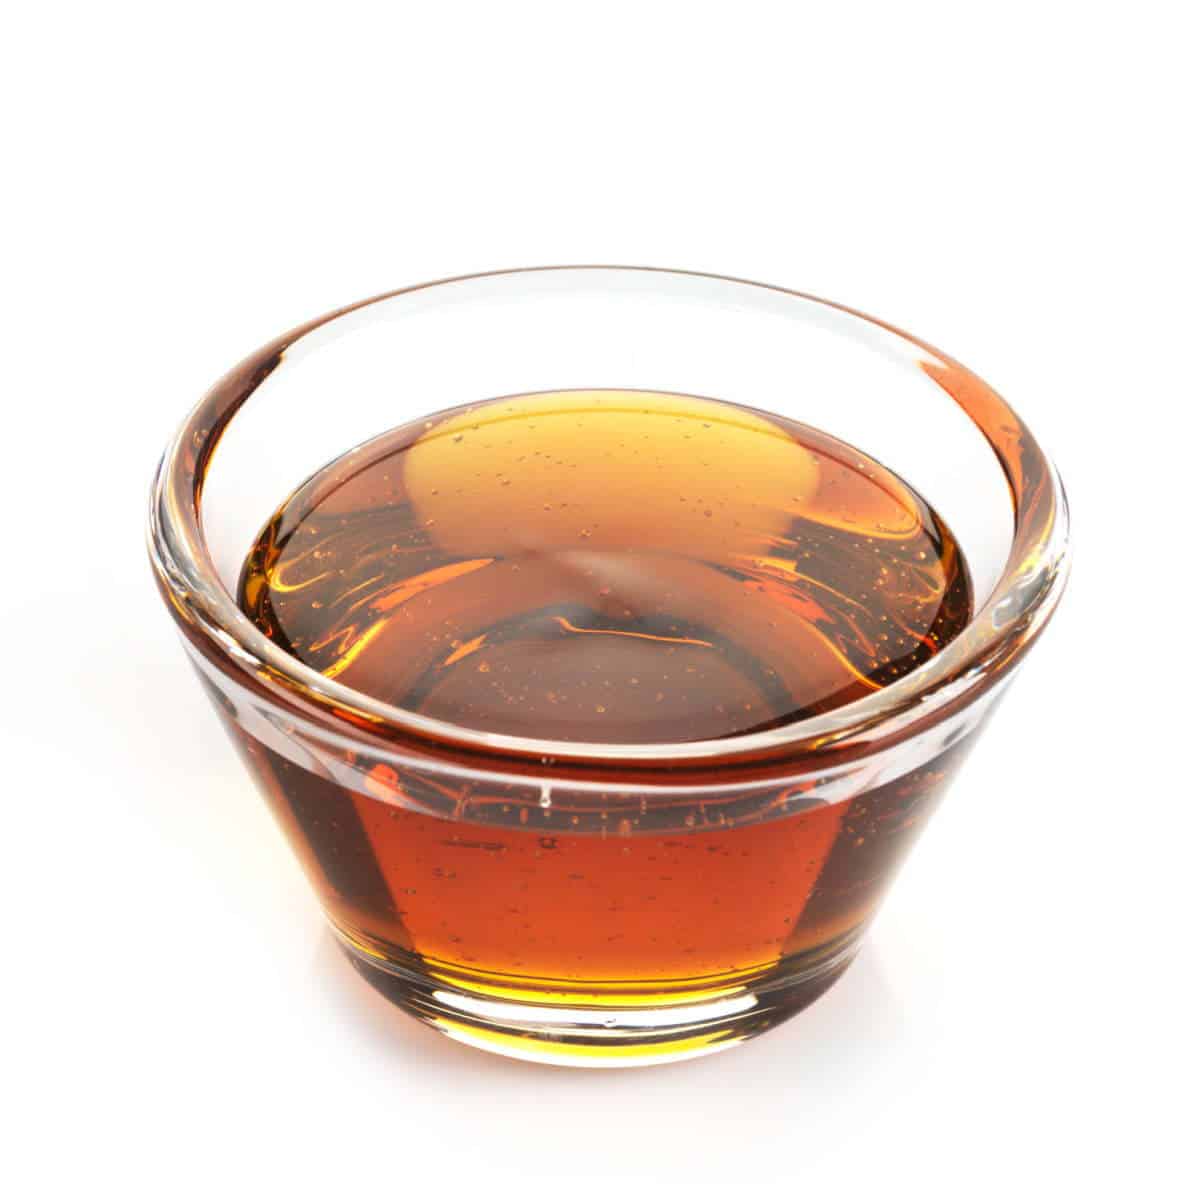 Syrup in glass cup with white background.